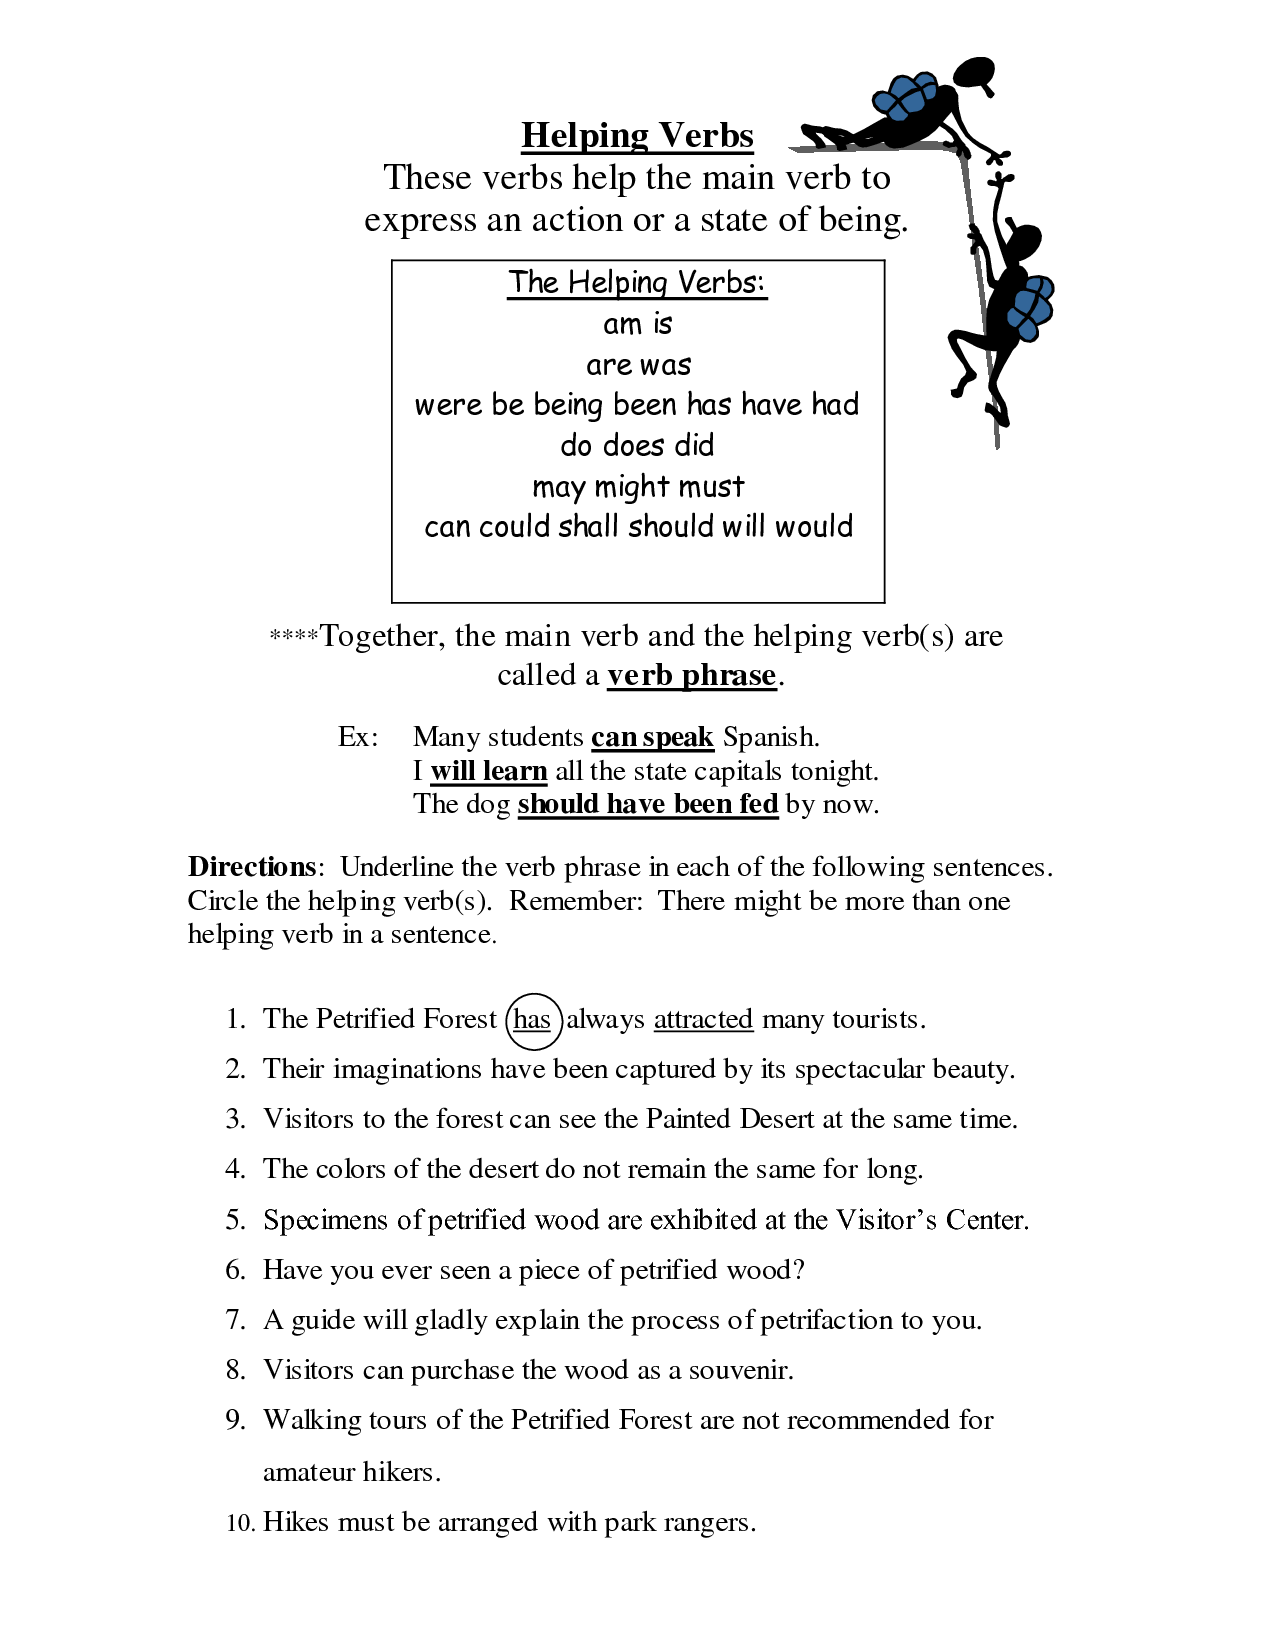 17 Best Images Of State Of Being Verbs Worksheet Action Linking Verb Worksheet Action And